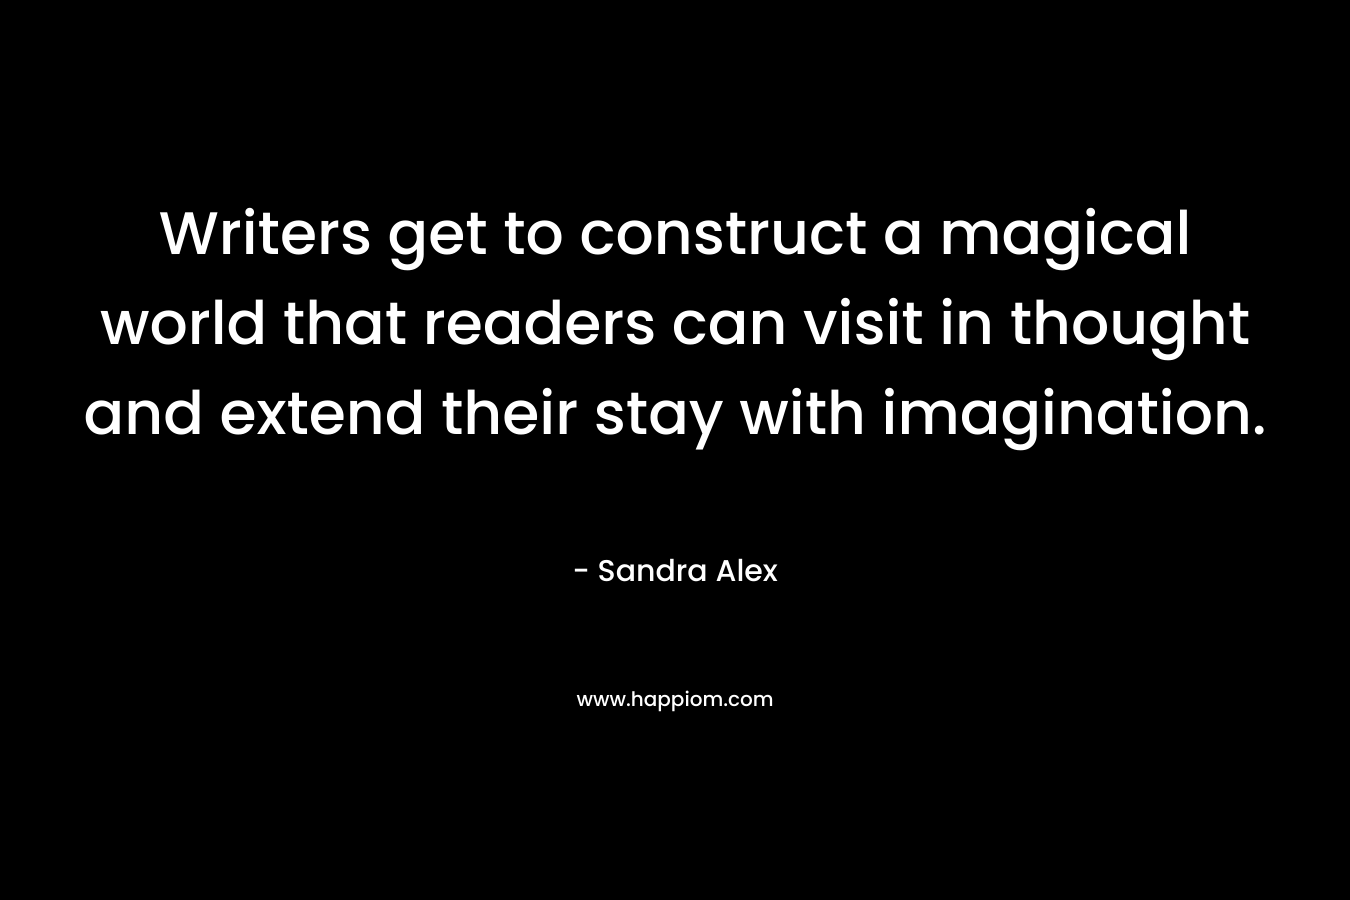 Writers get to construct a magical world that readers can visit in thought and extend their stay with imagination.